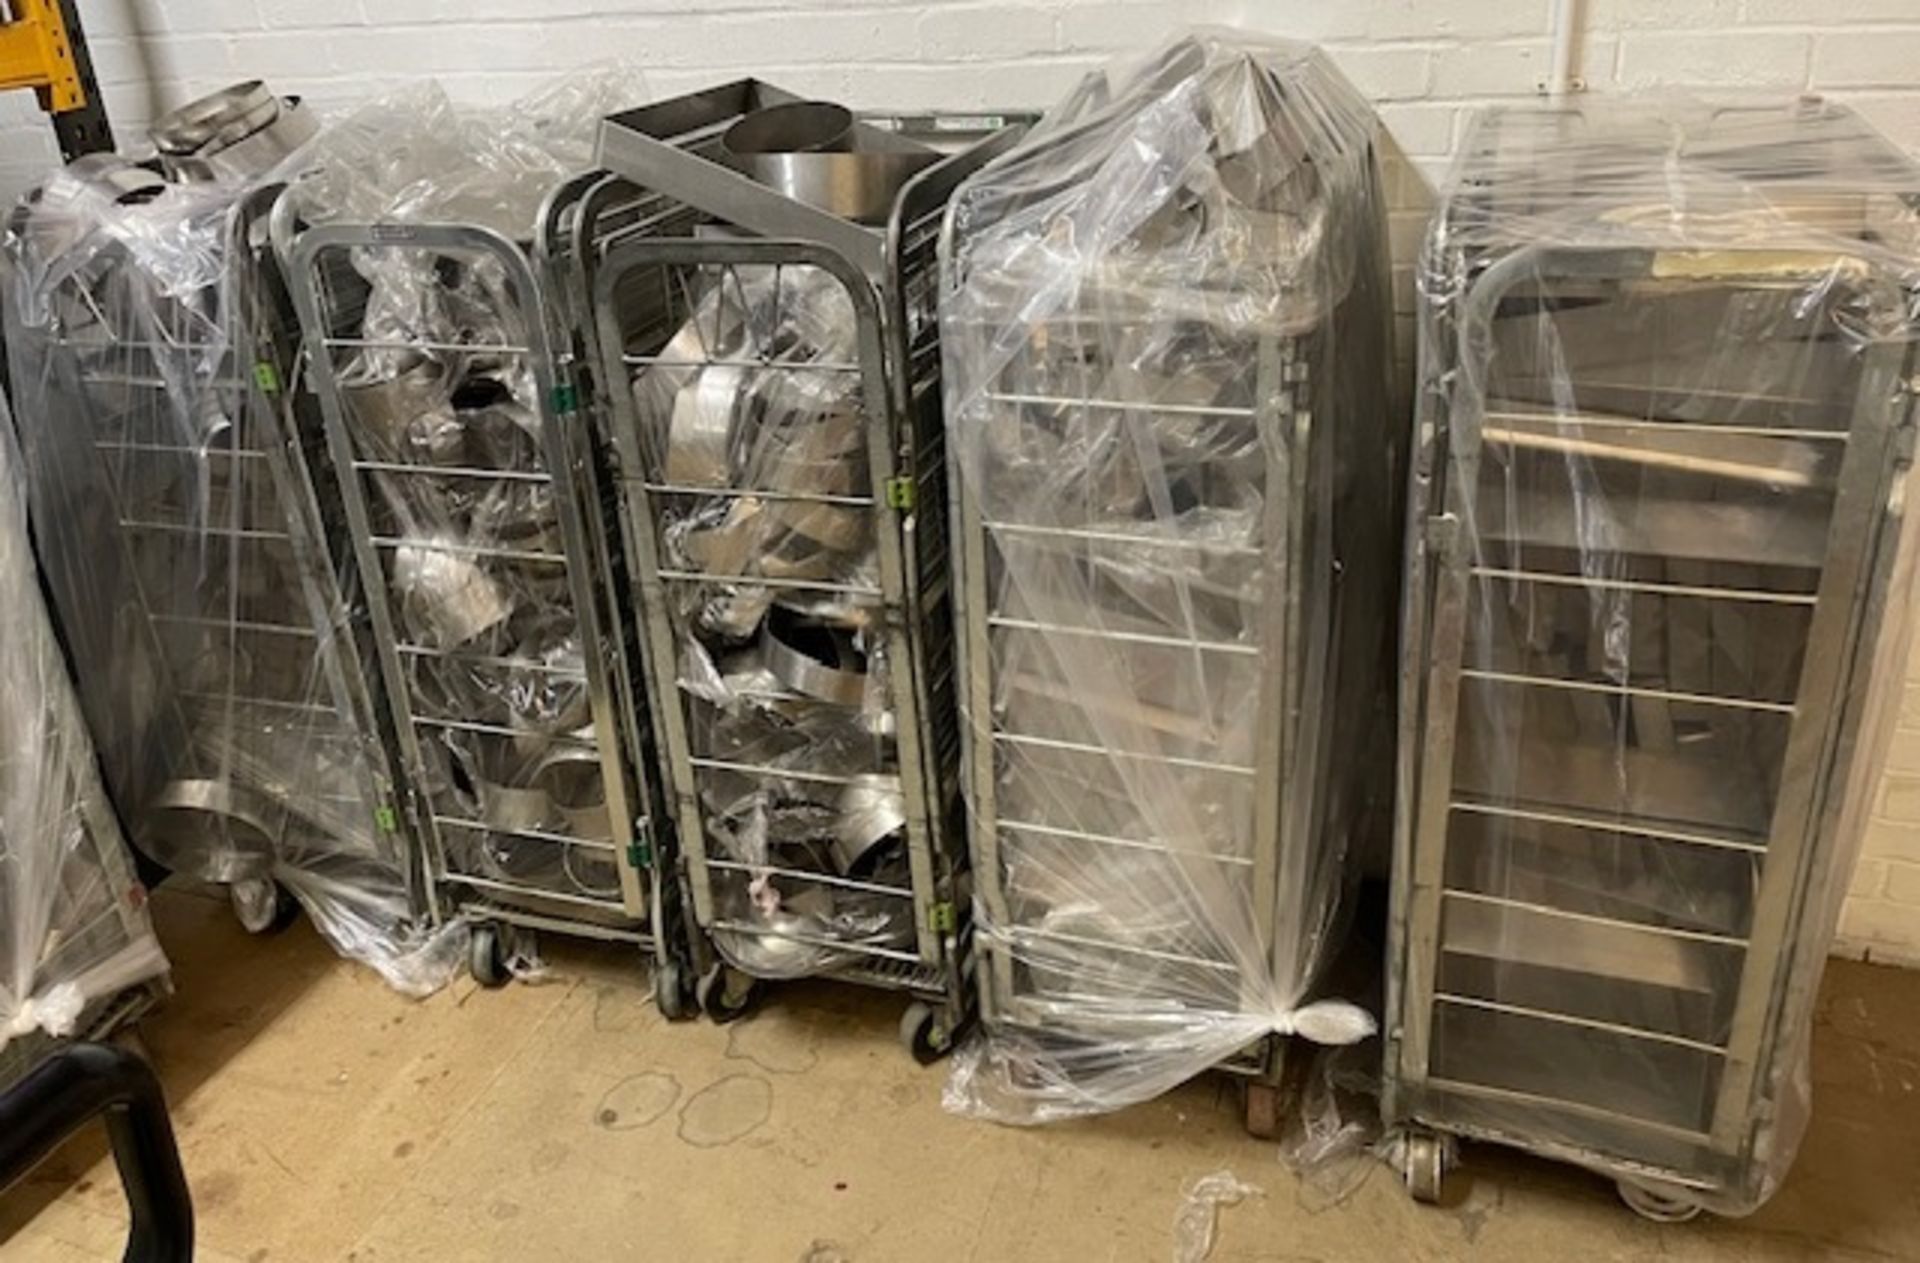 5 Cage Trollies & Contents of Assorted Stainless Steel Patisserie Moulds (Mezzanine) (Location: NW